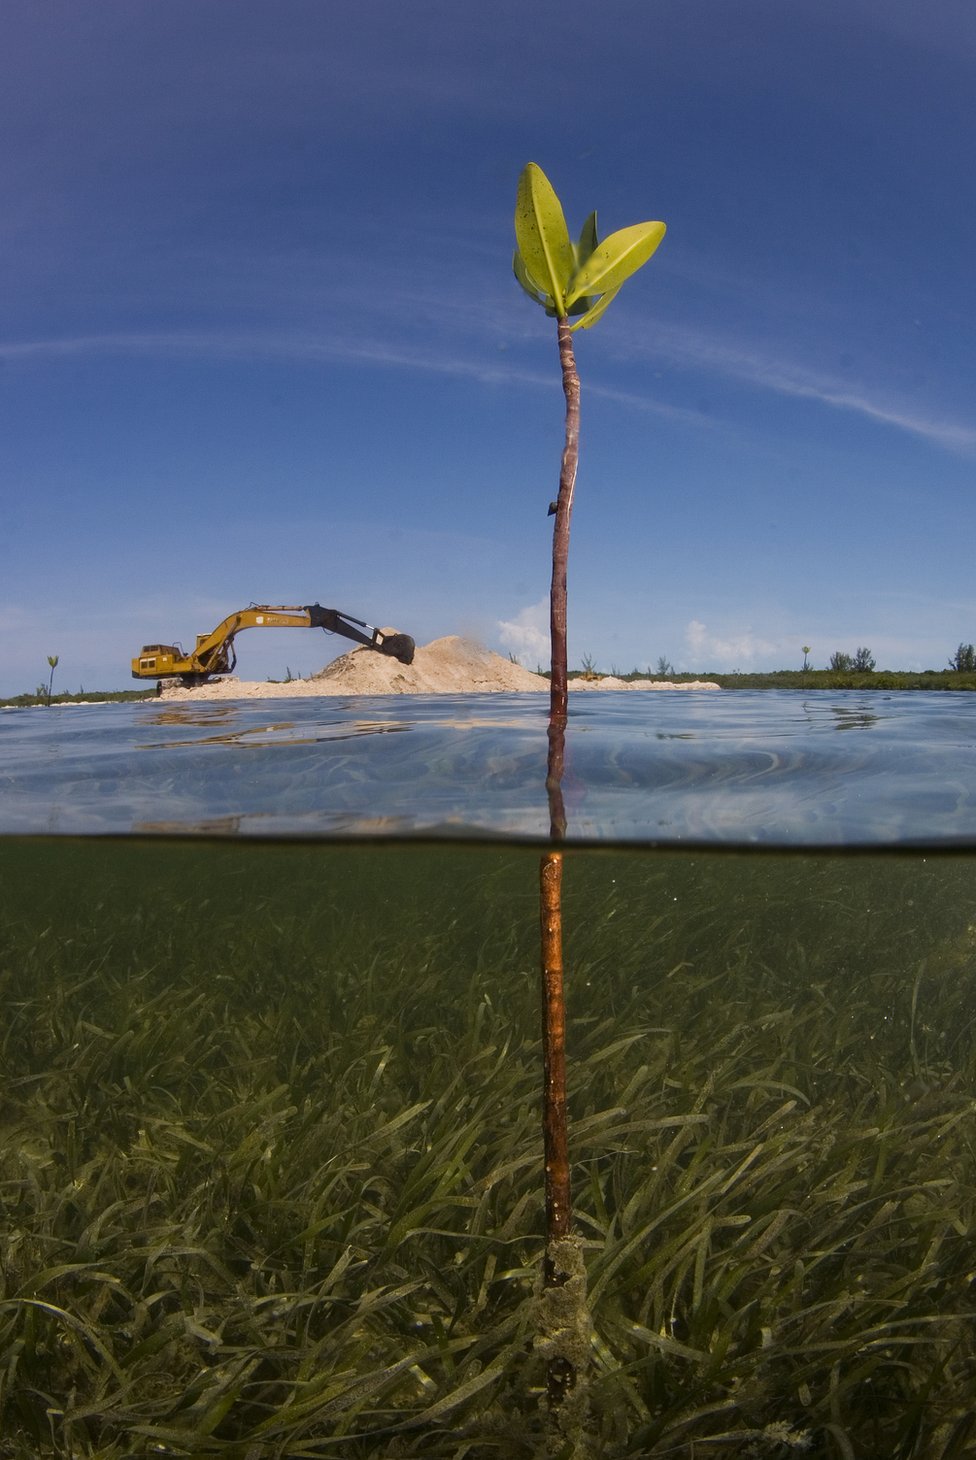 A shot of a mangrove sapling growing out of the water with a bulldozer on land in the background